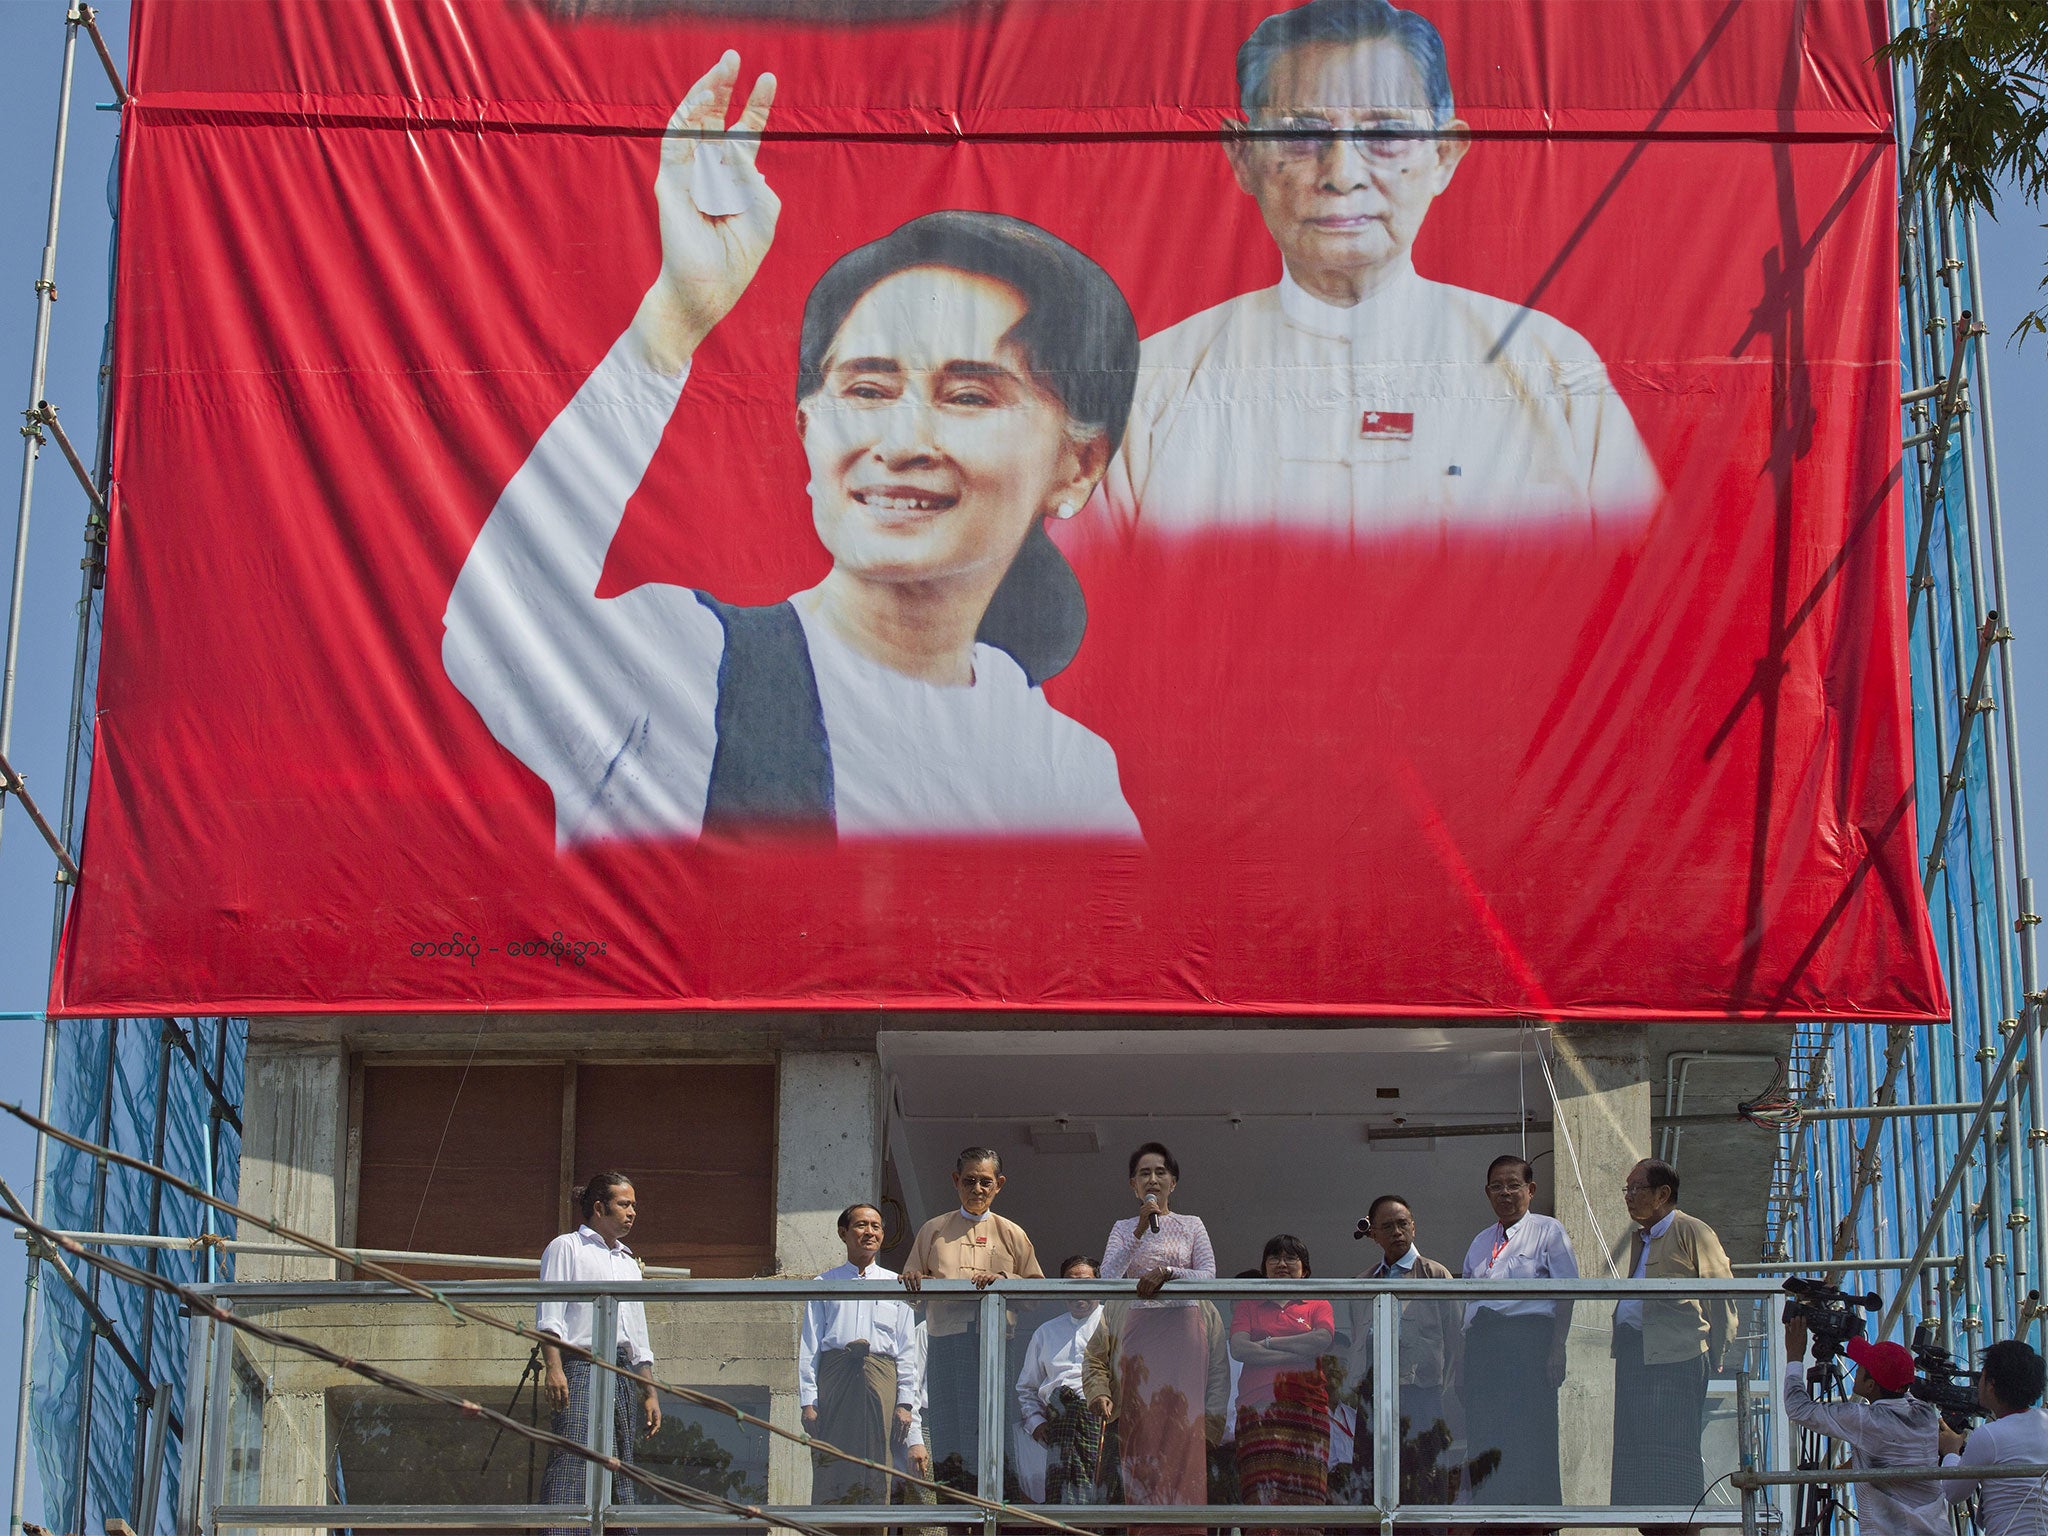 Aung San Suu Kyi will not be able to hold the post of president or vice president